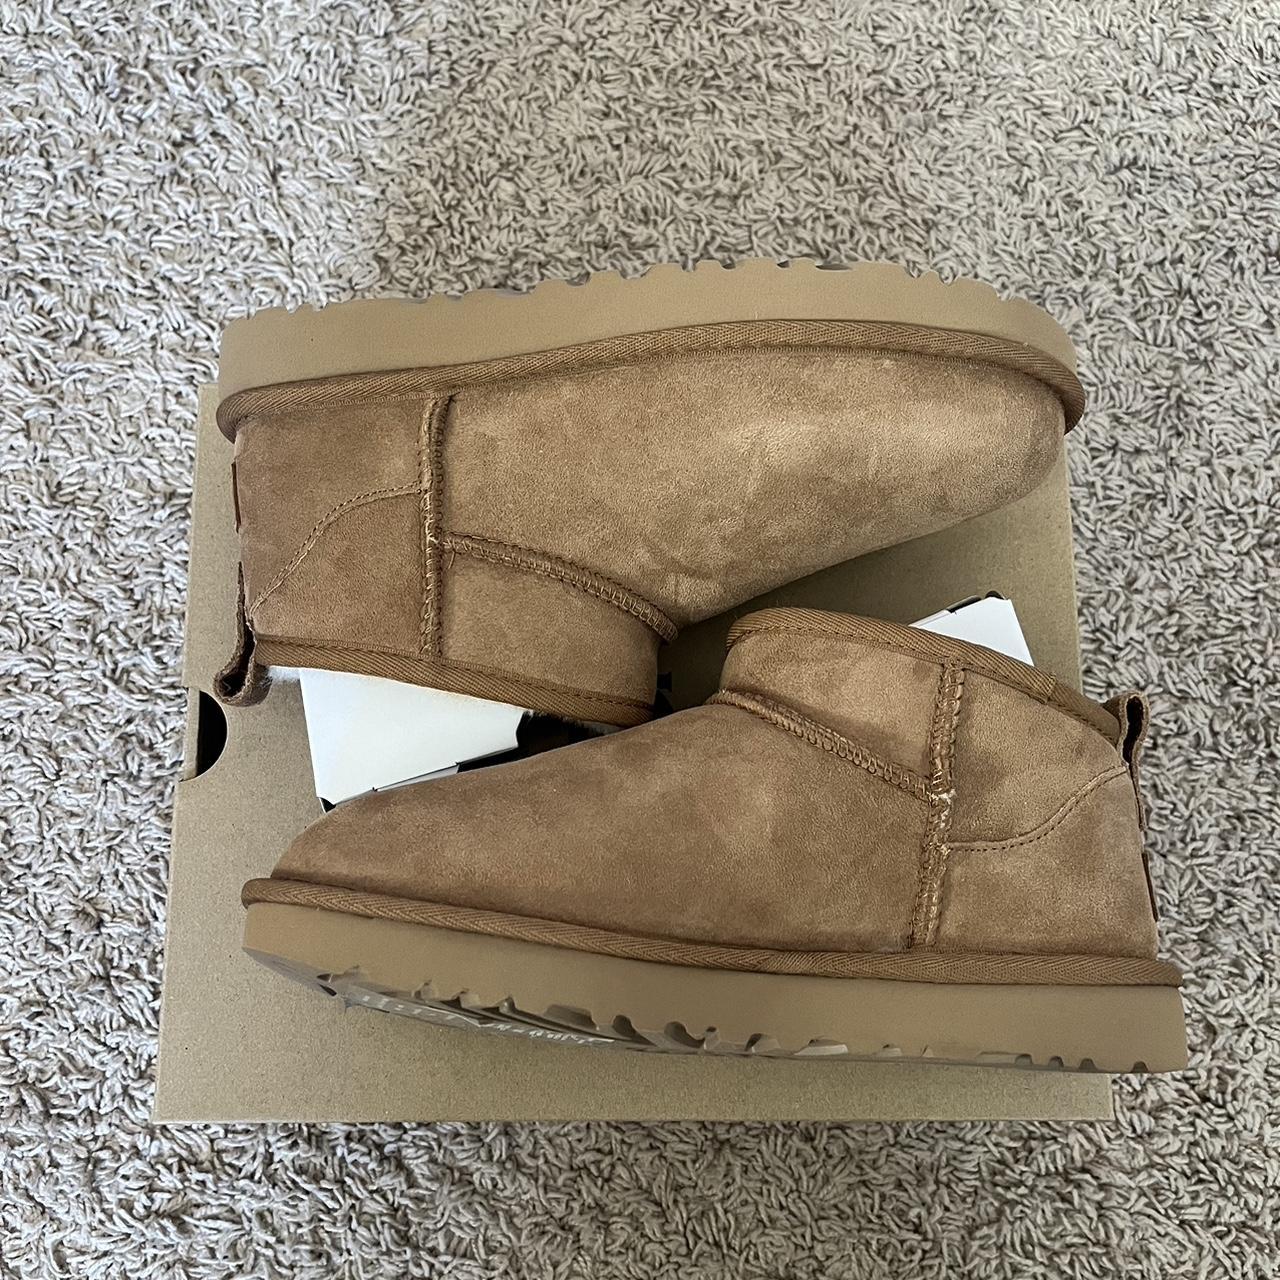 Womens SOLID COLOR uggs 65$ Variety of sizes Womens - Depop